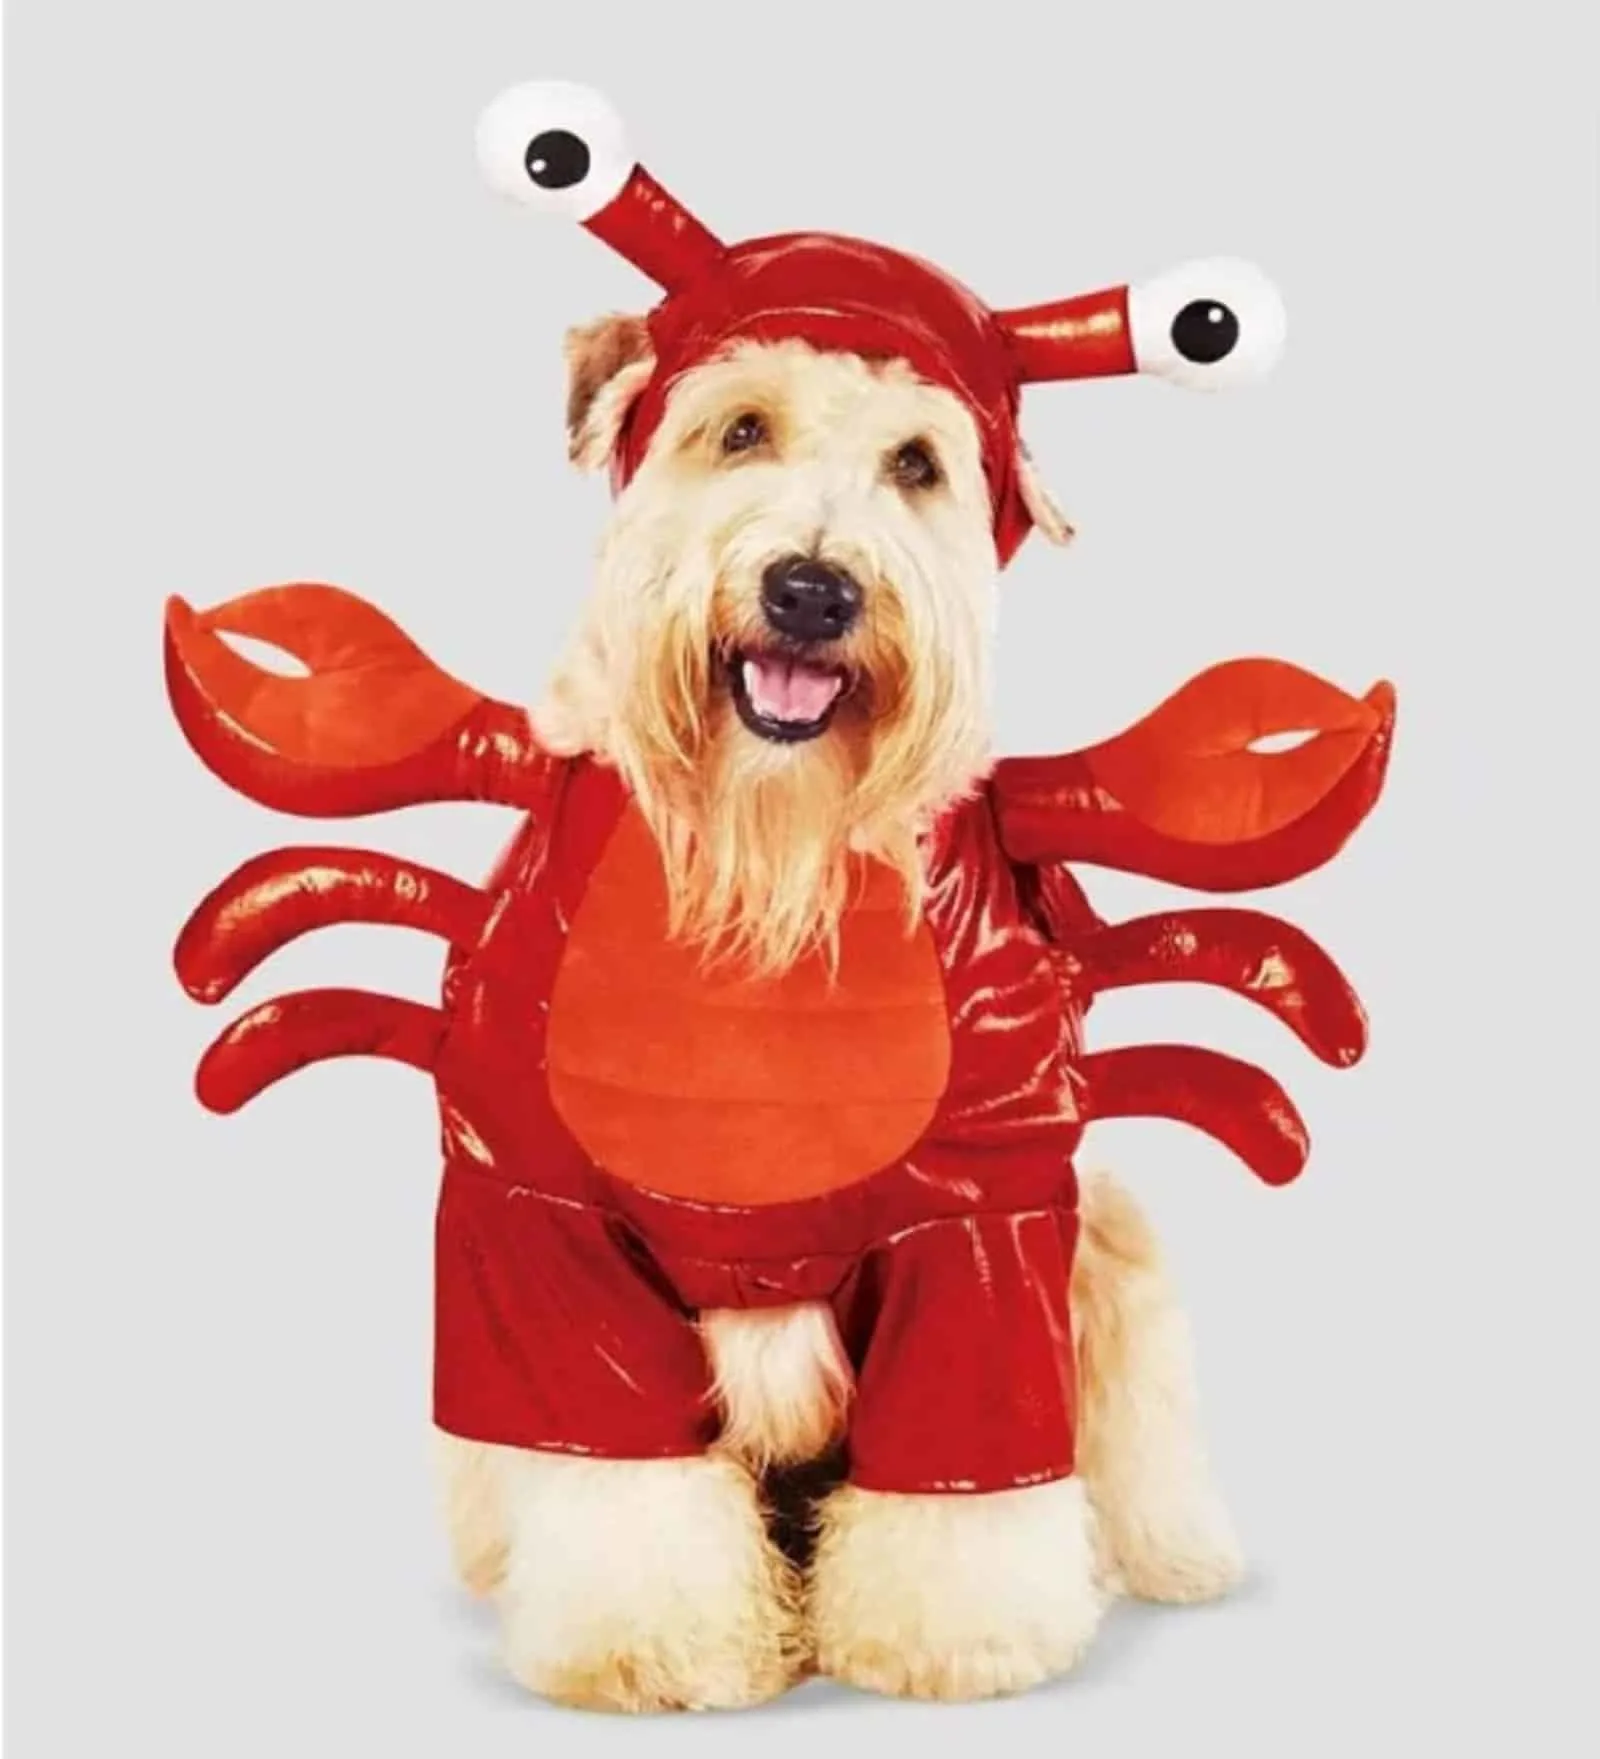 dog wearing red lobster costume looking funny